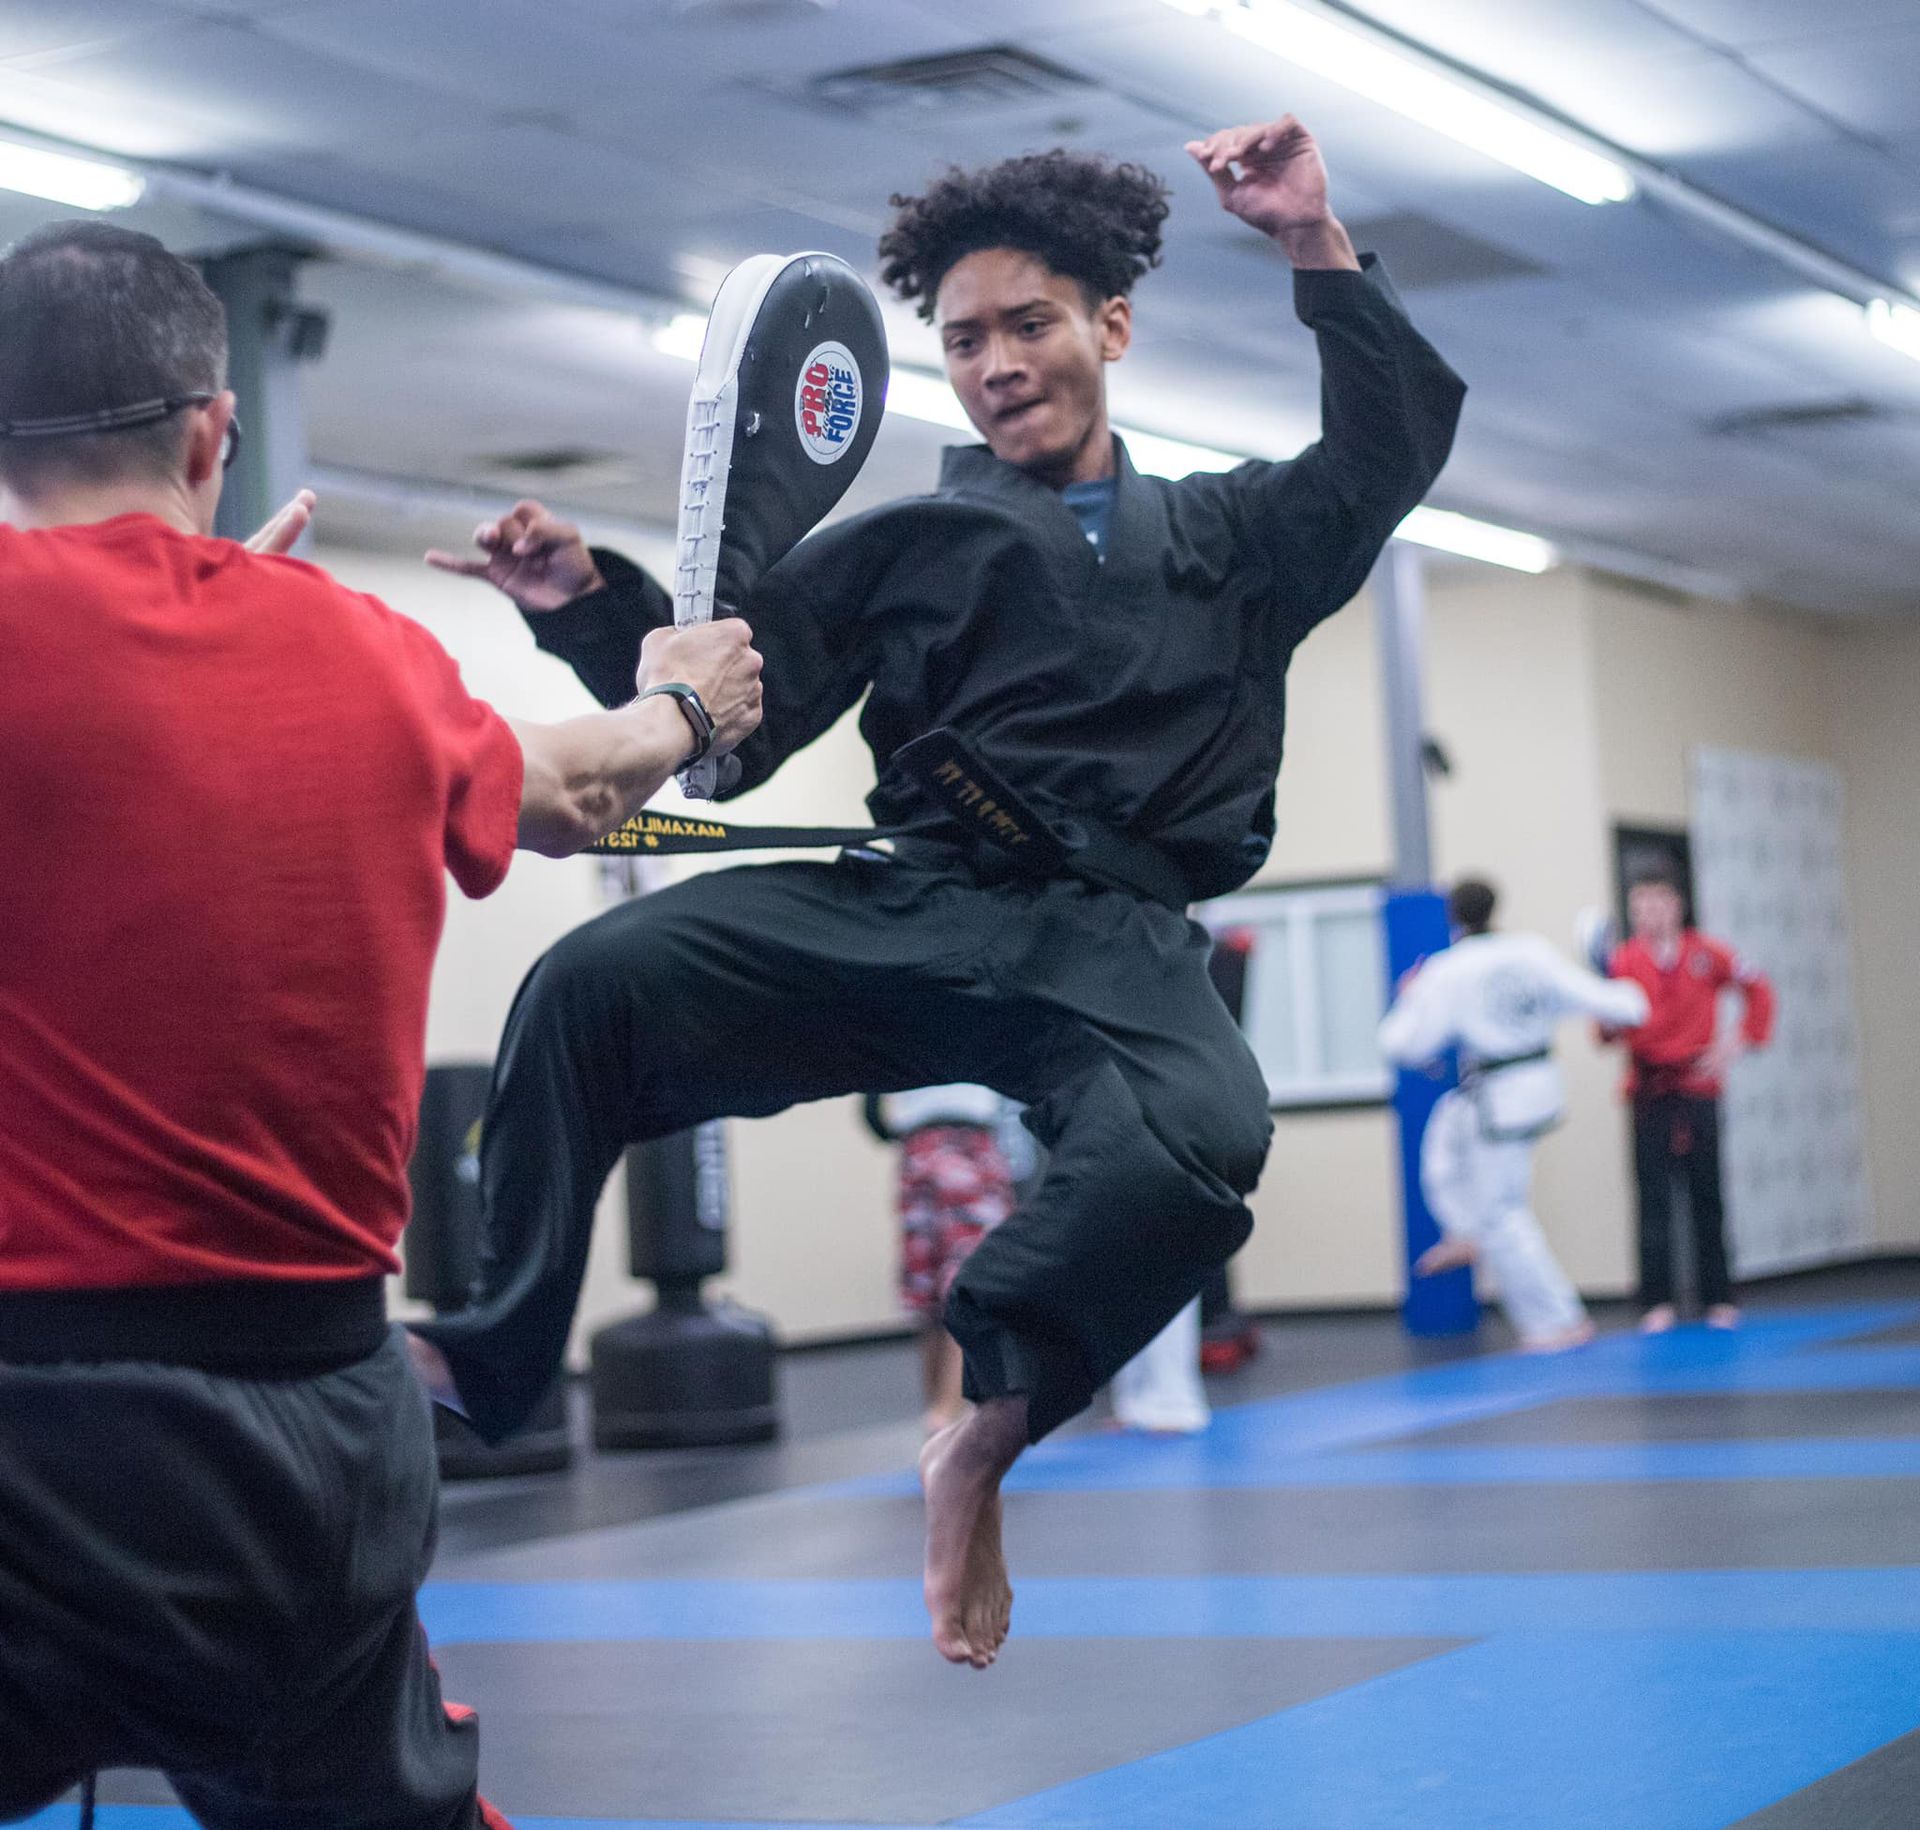 a man in a black karate uniform is jumping in the air